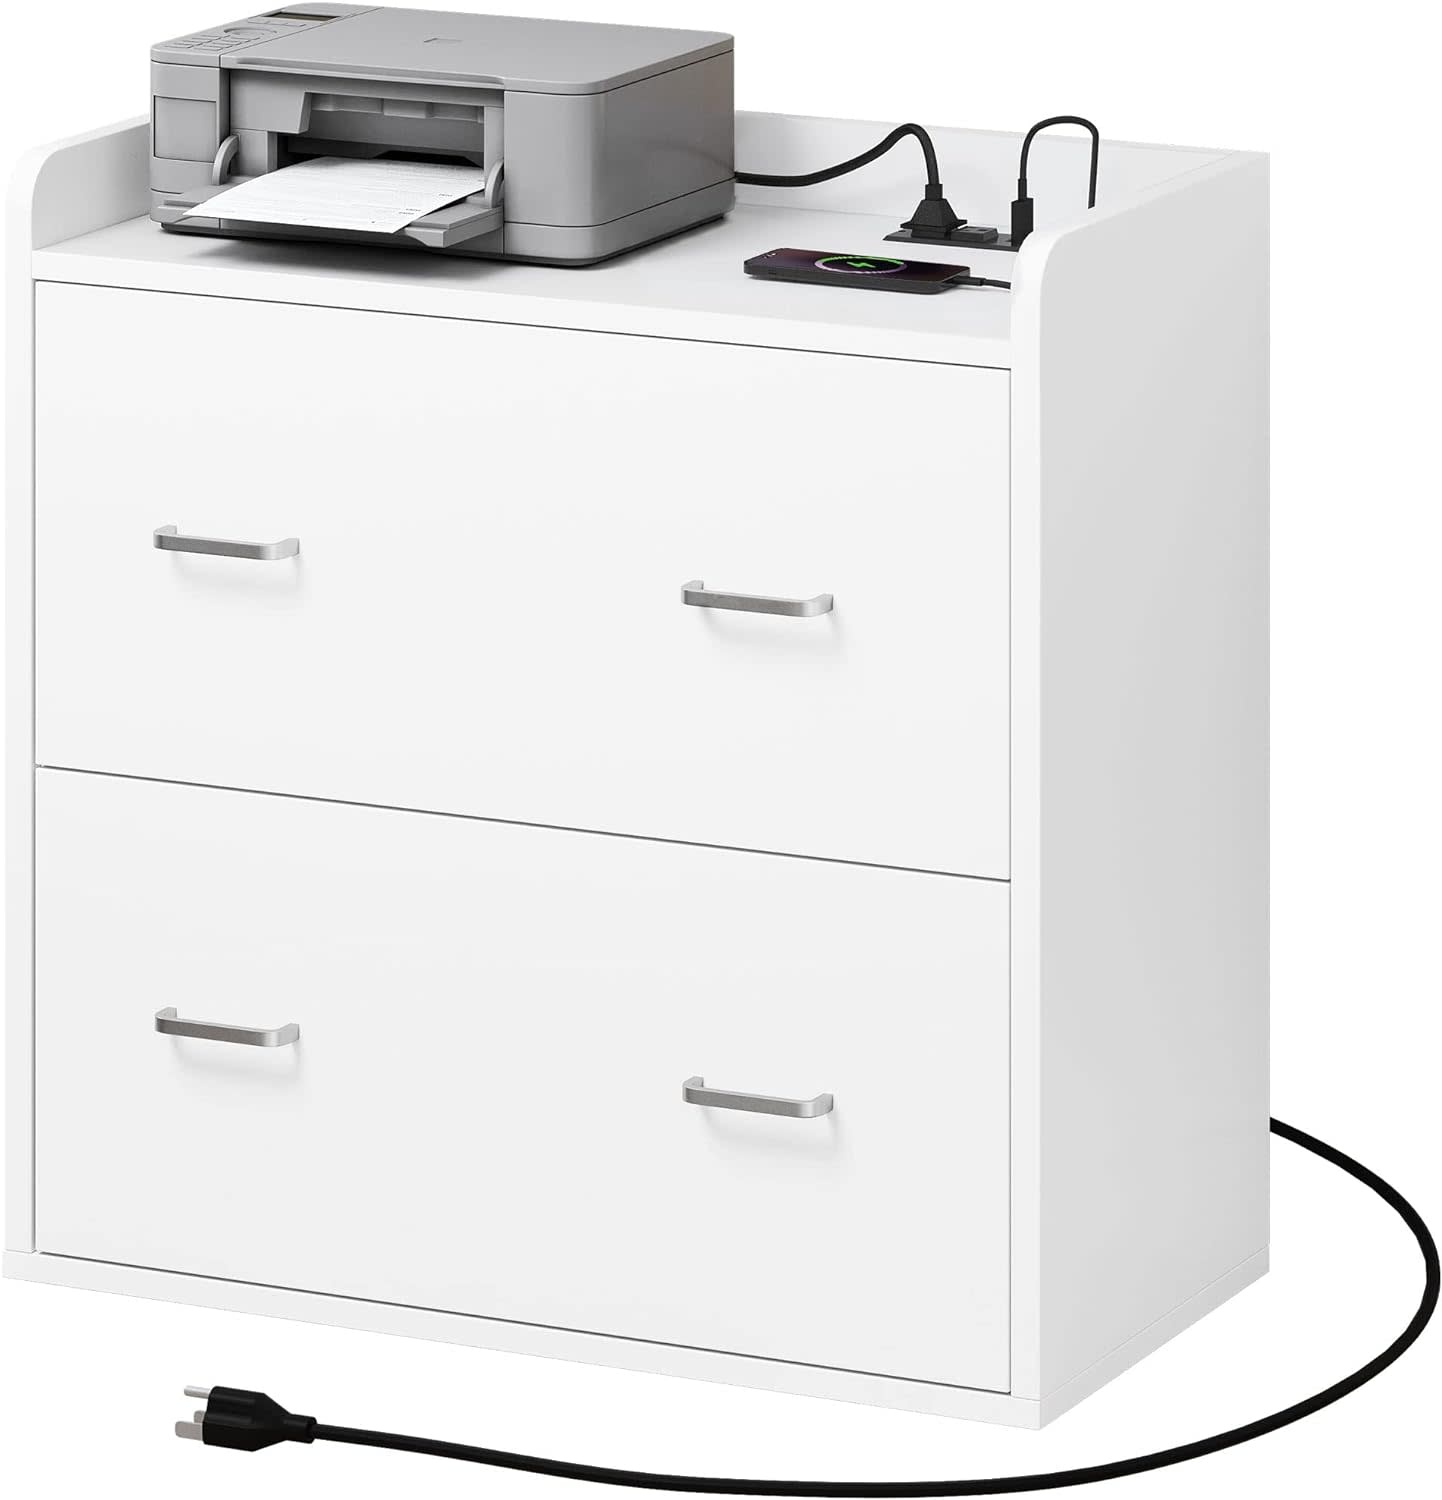 https://cdn.shoplightspeed.com/shops/640671/files/60298052/yitahome-file-cabinet-with-charging-station-large.jpg